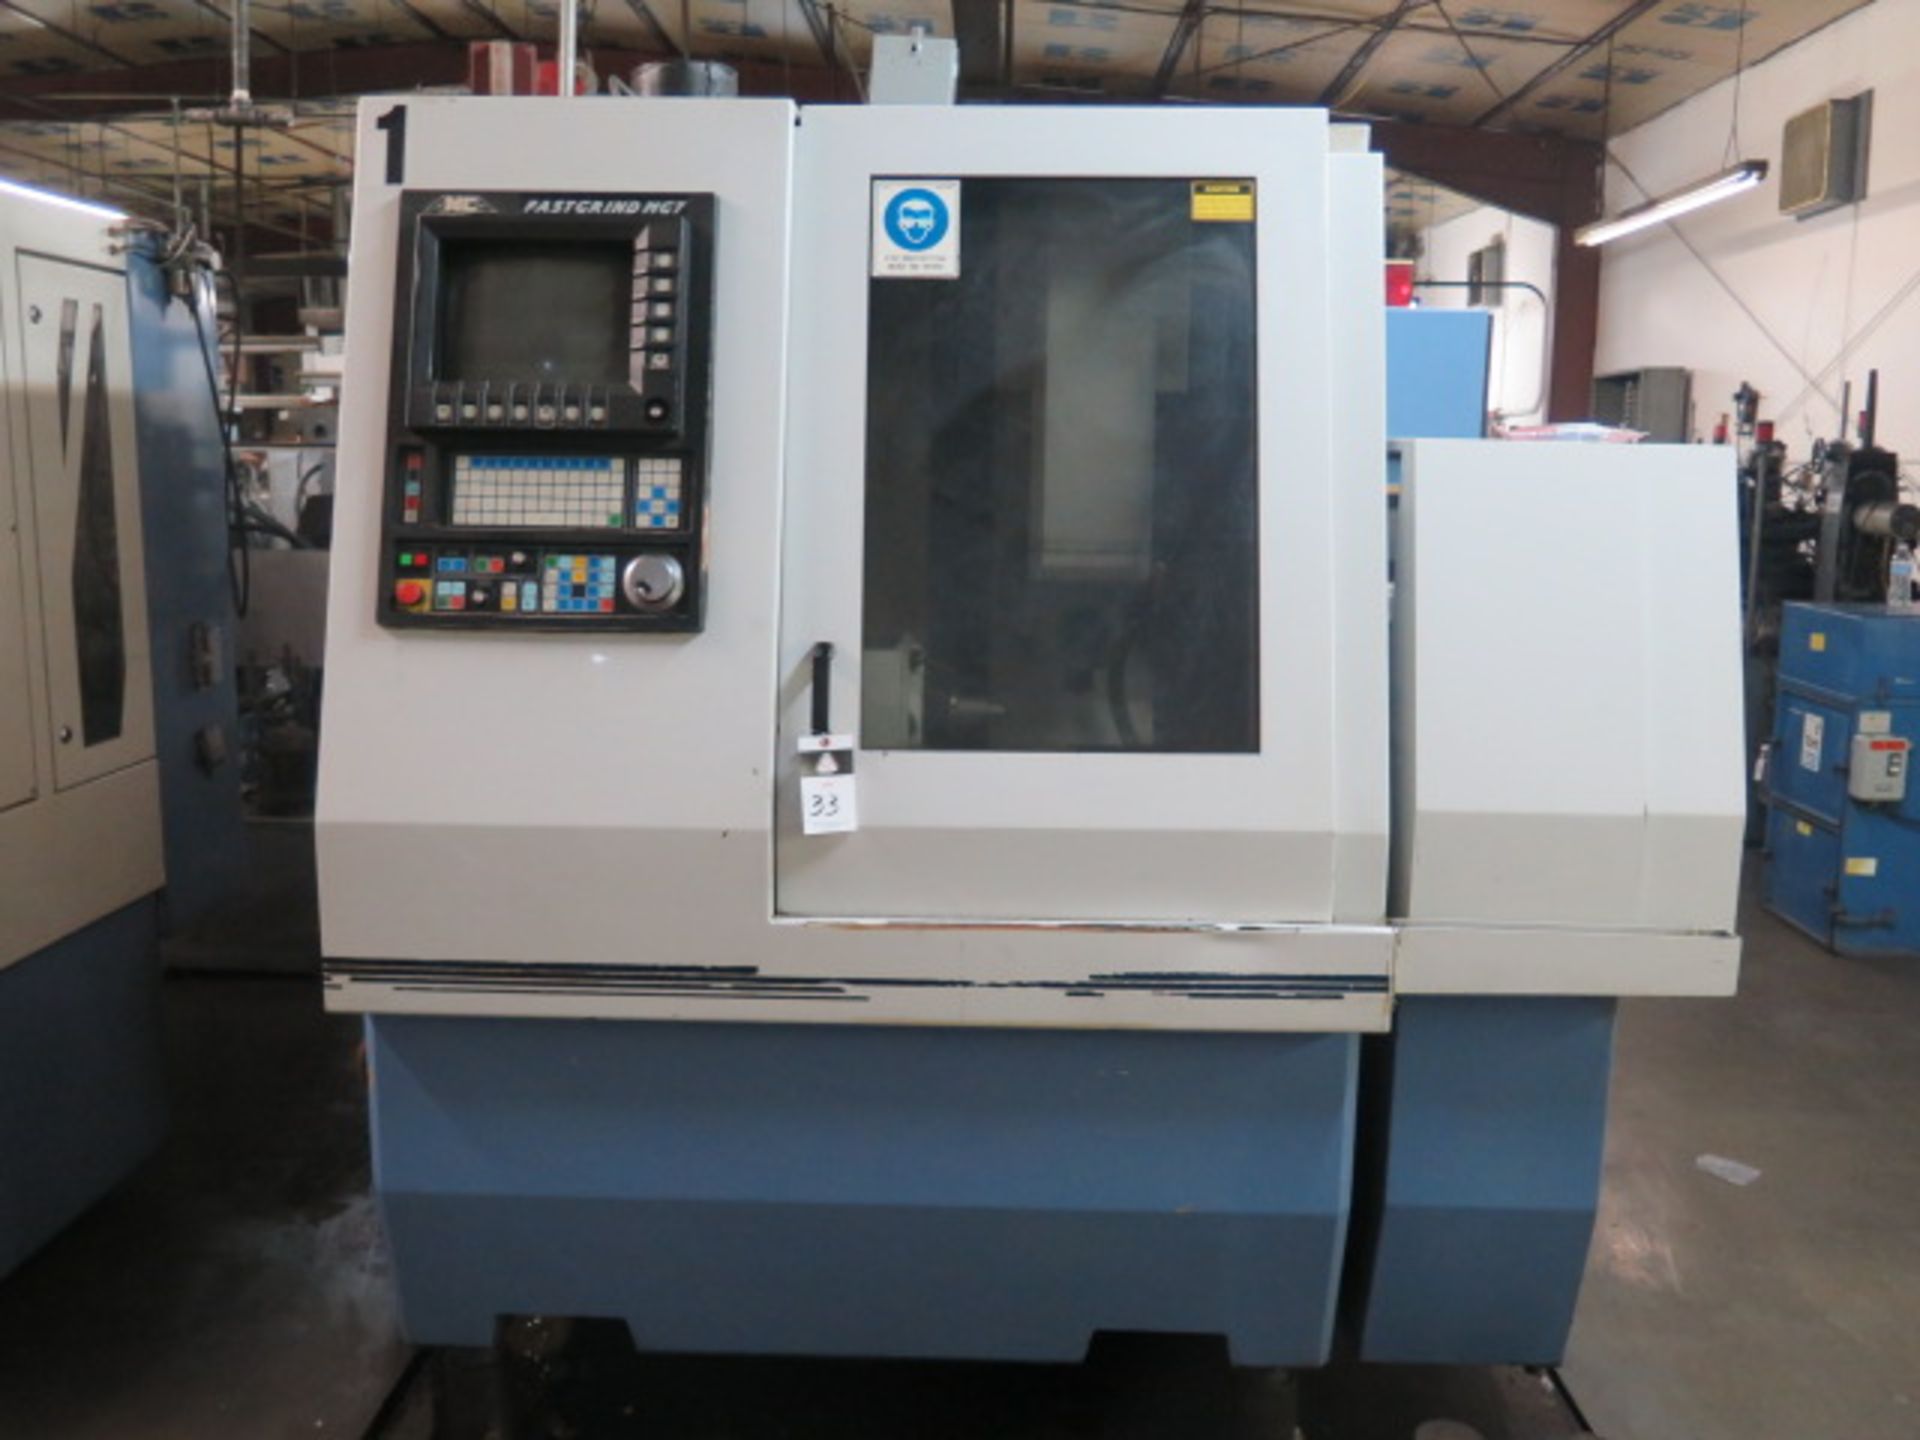 1997 Anca MG7 “Fastgrind” 7-Axis CNC Tool & Cutter Grinder w/ Anca Controls, Steady Rest, SOLD AS IS